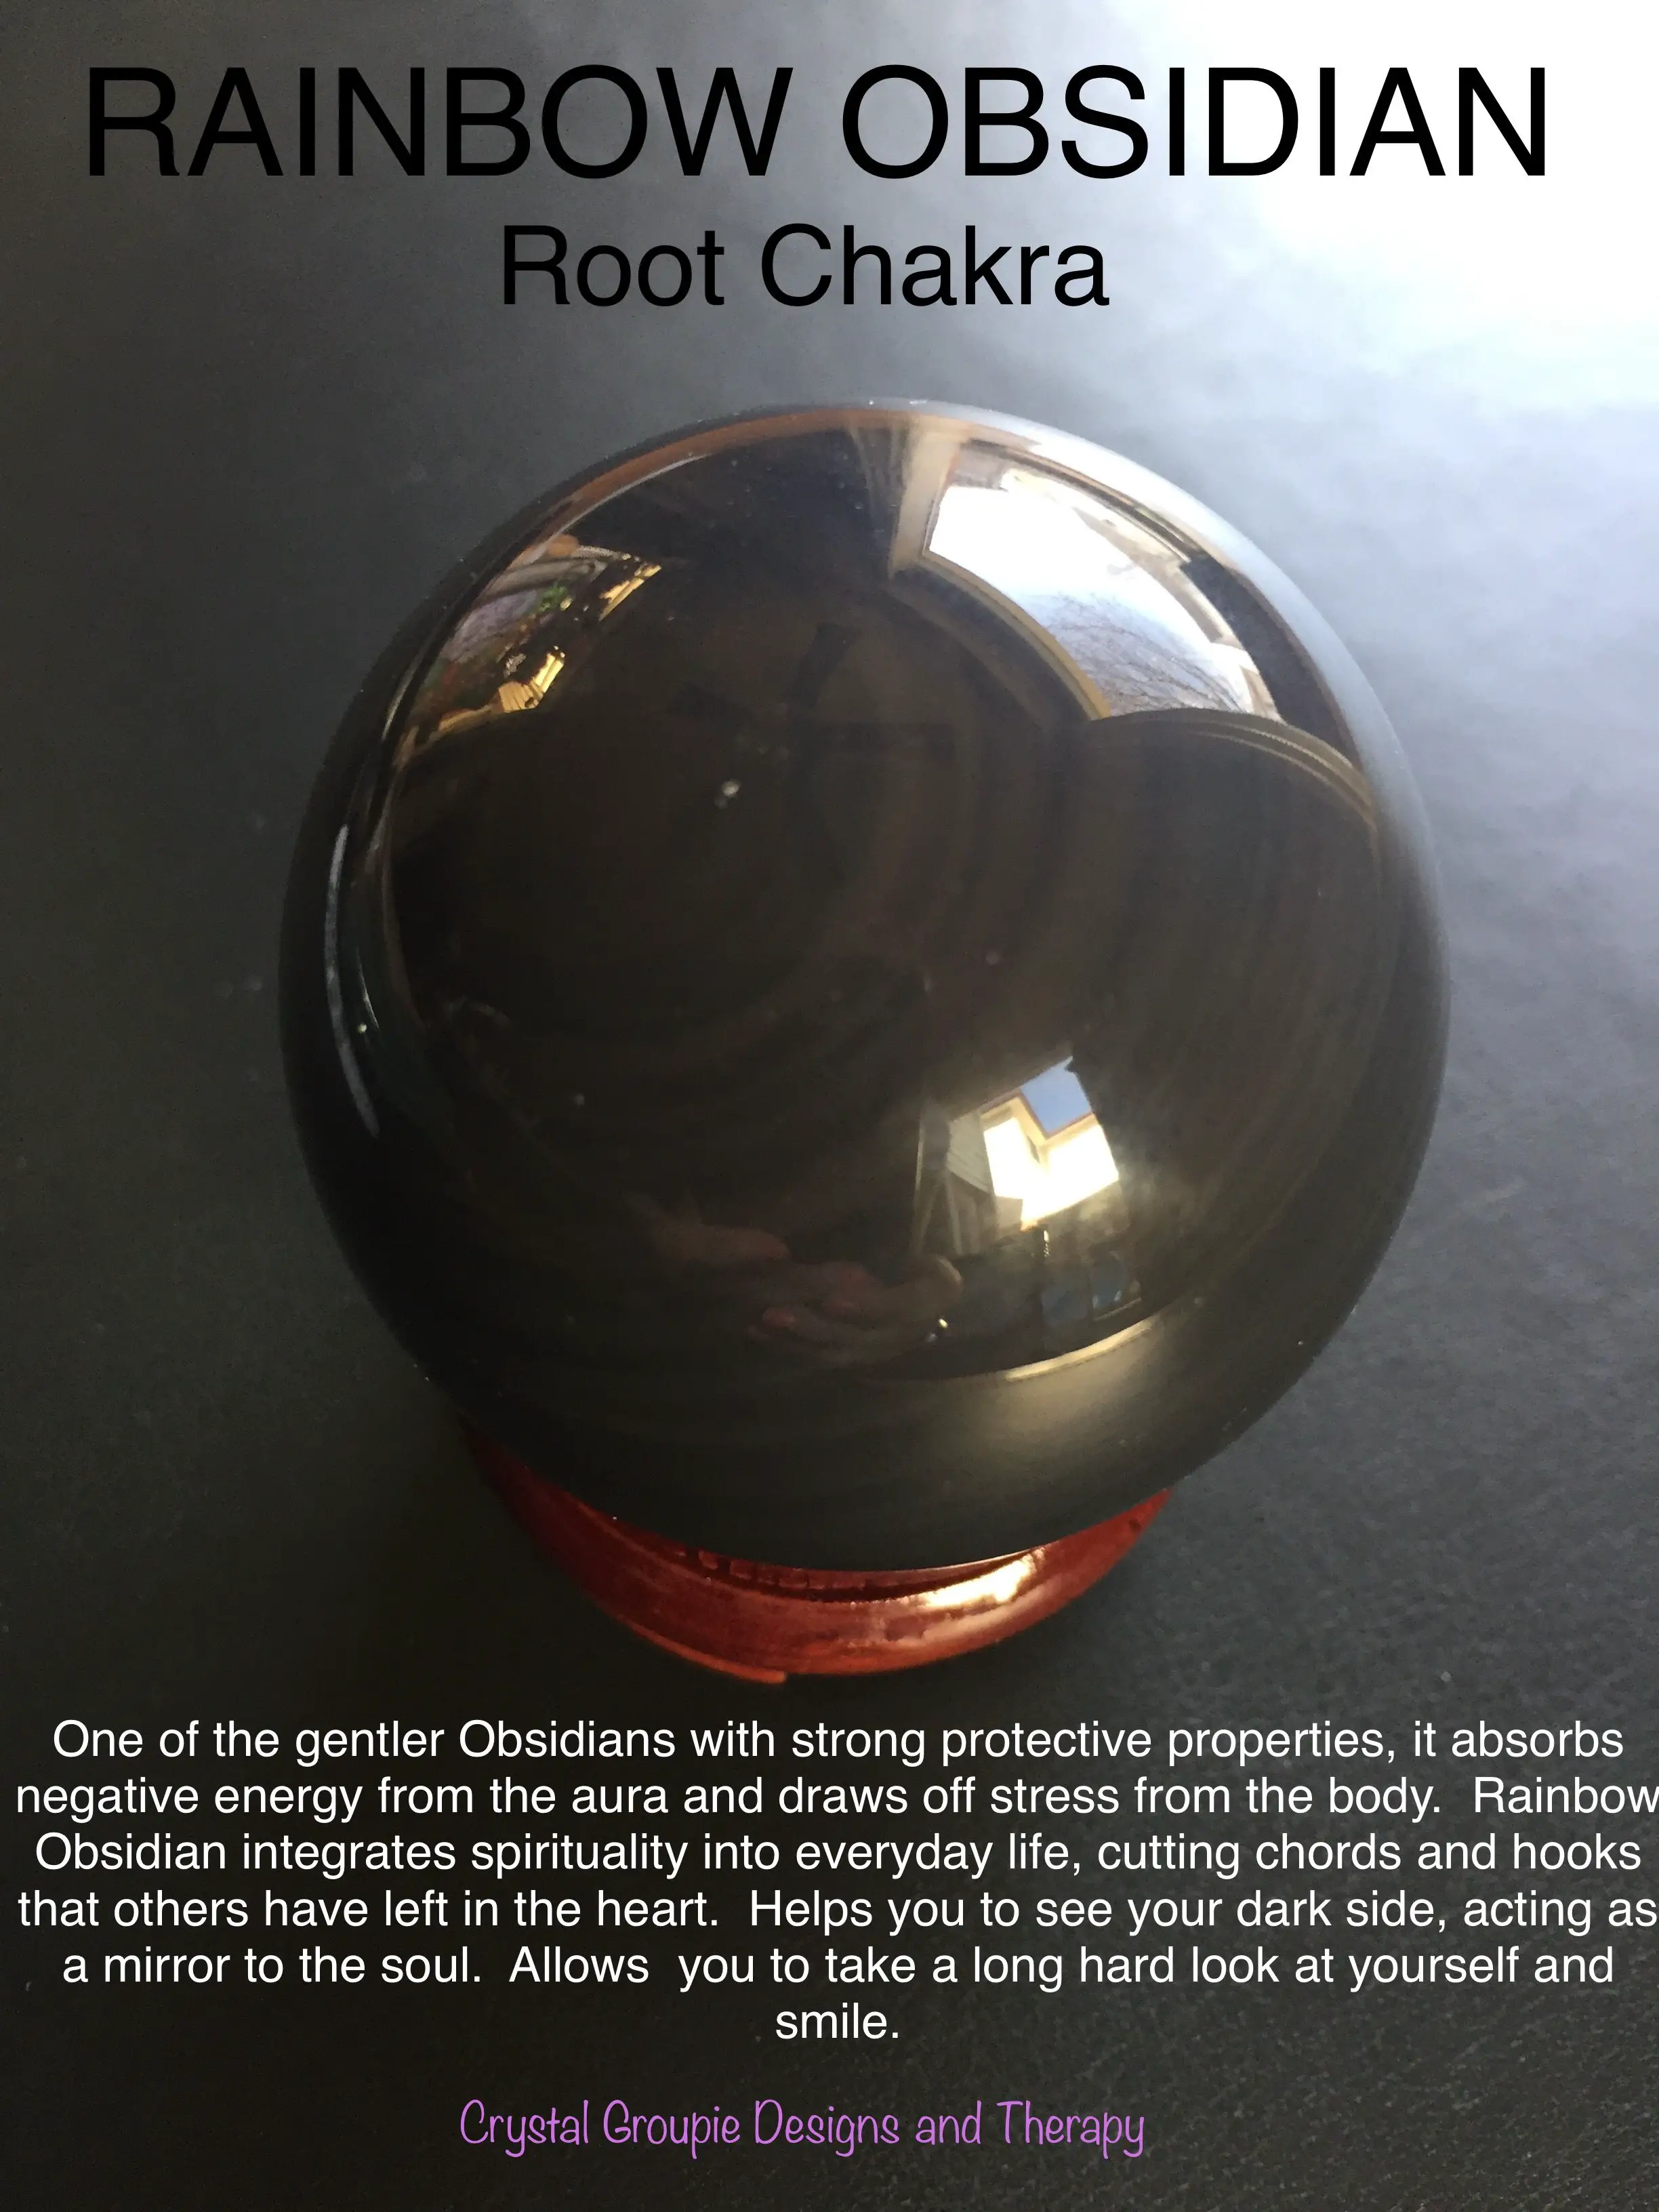 What Is Rainbow Obsidian?